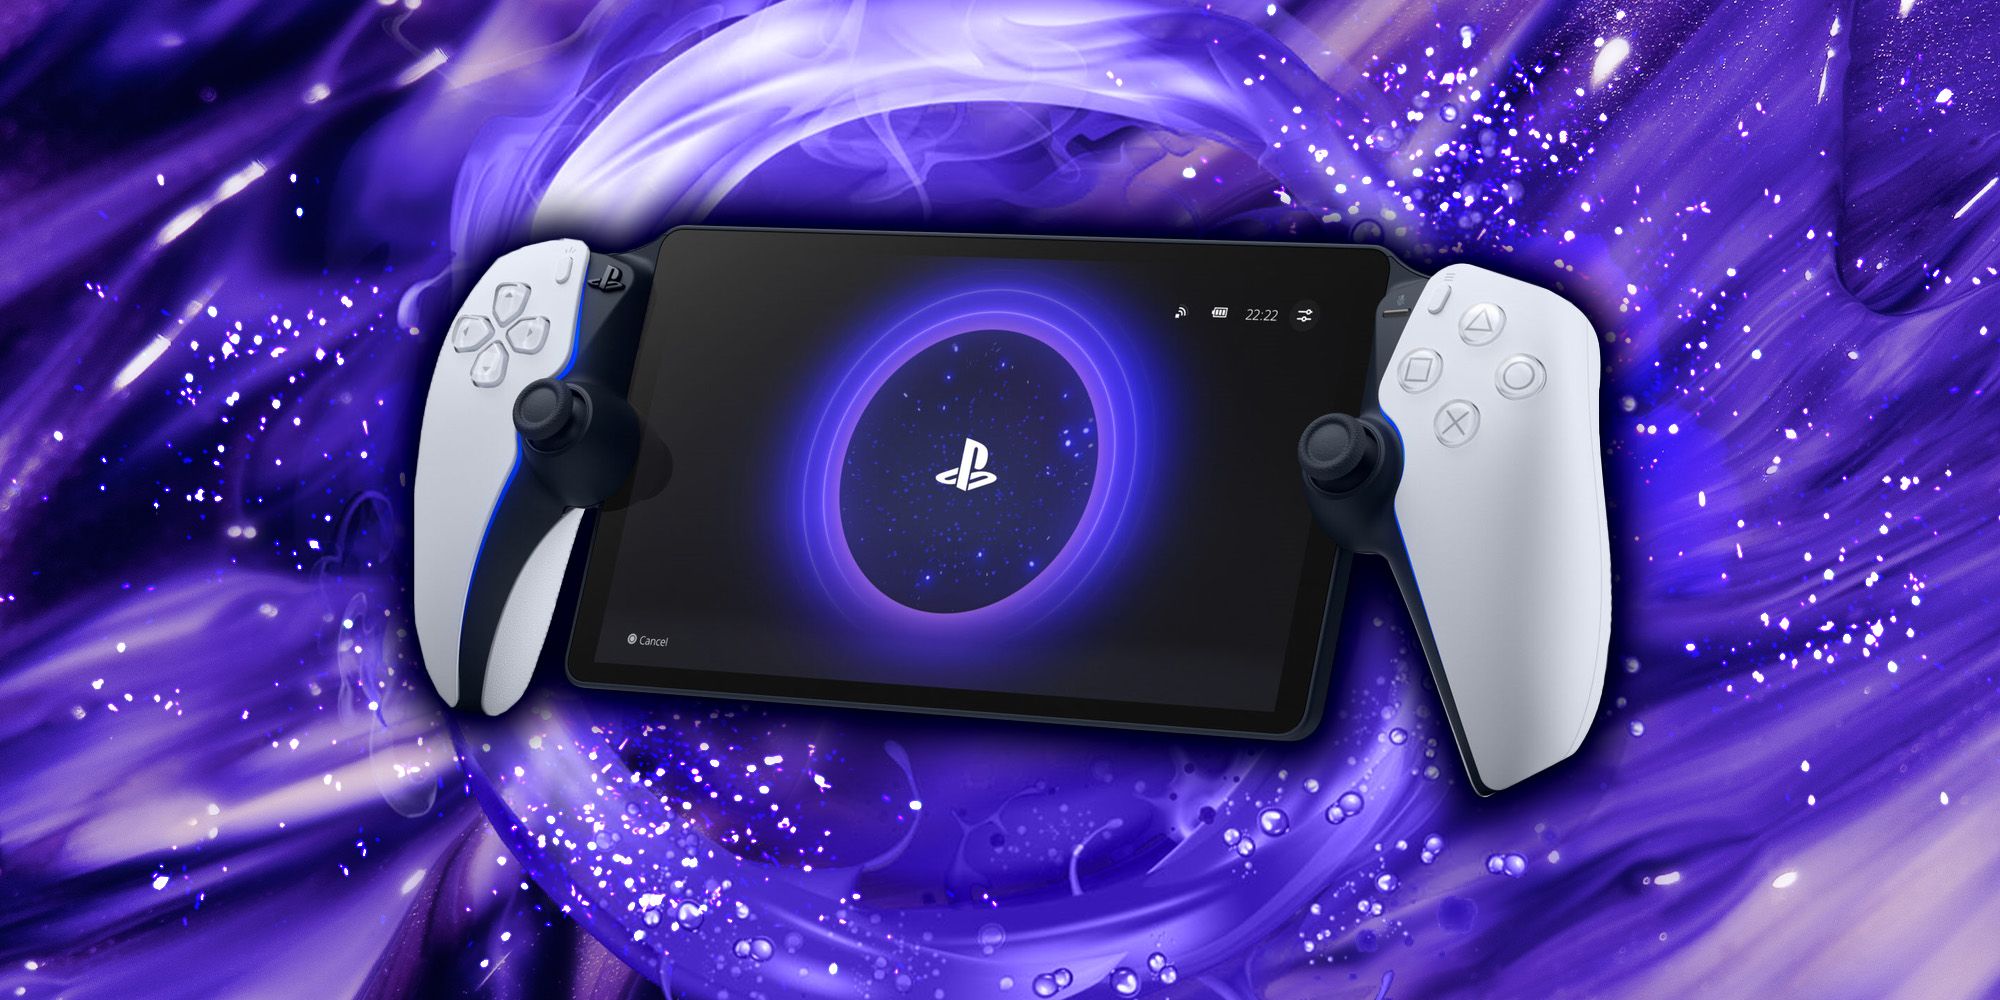 “A Truly Seamless & Excellent Hardware Addition”: PlayStation Portal Review